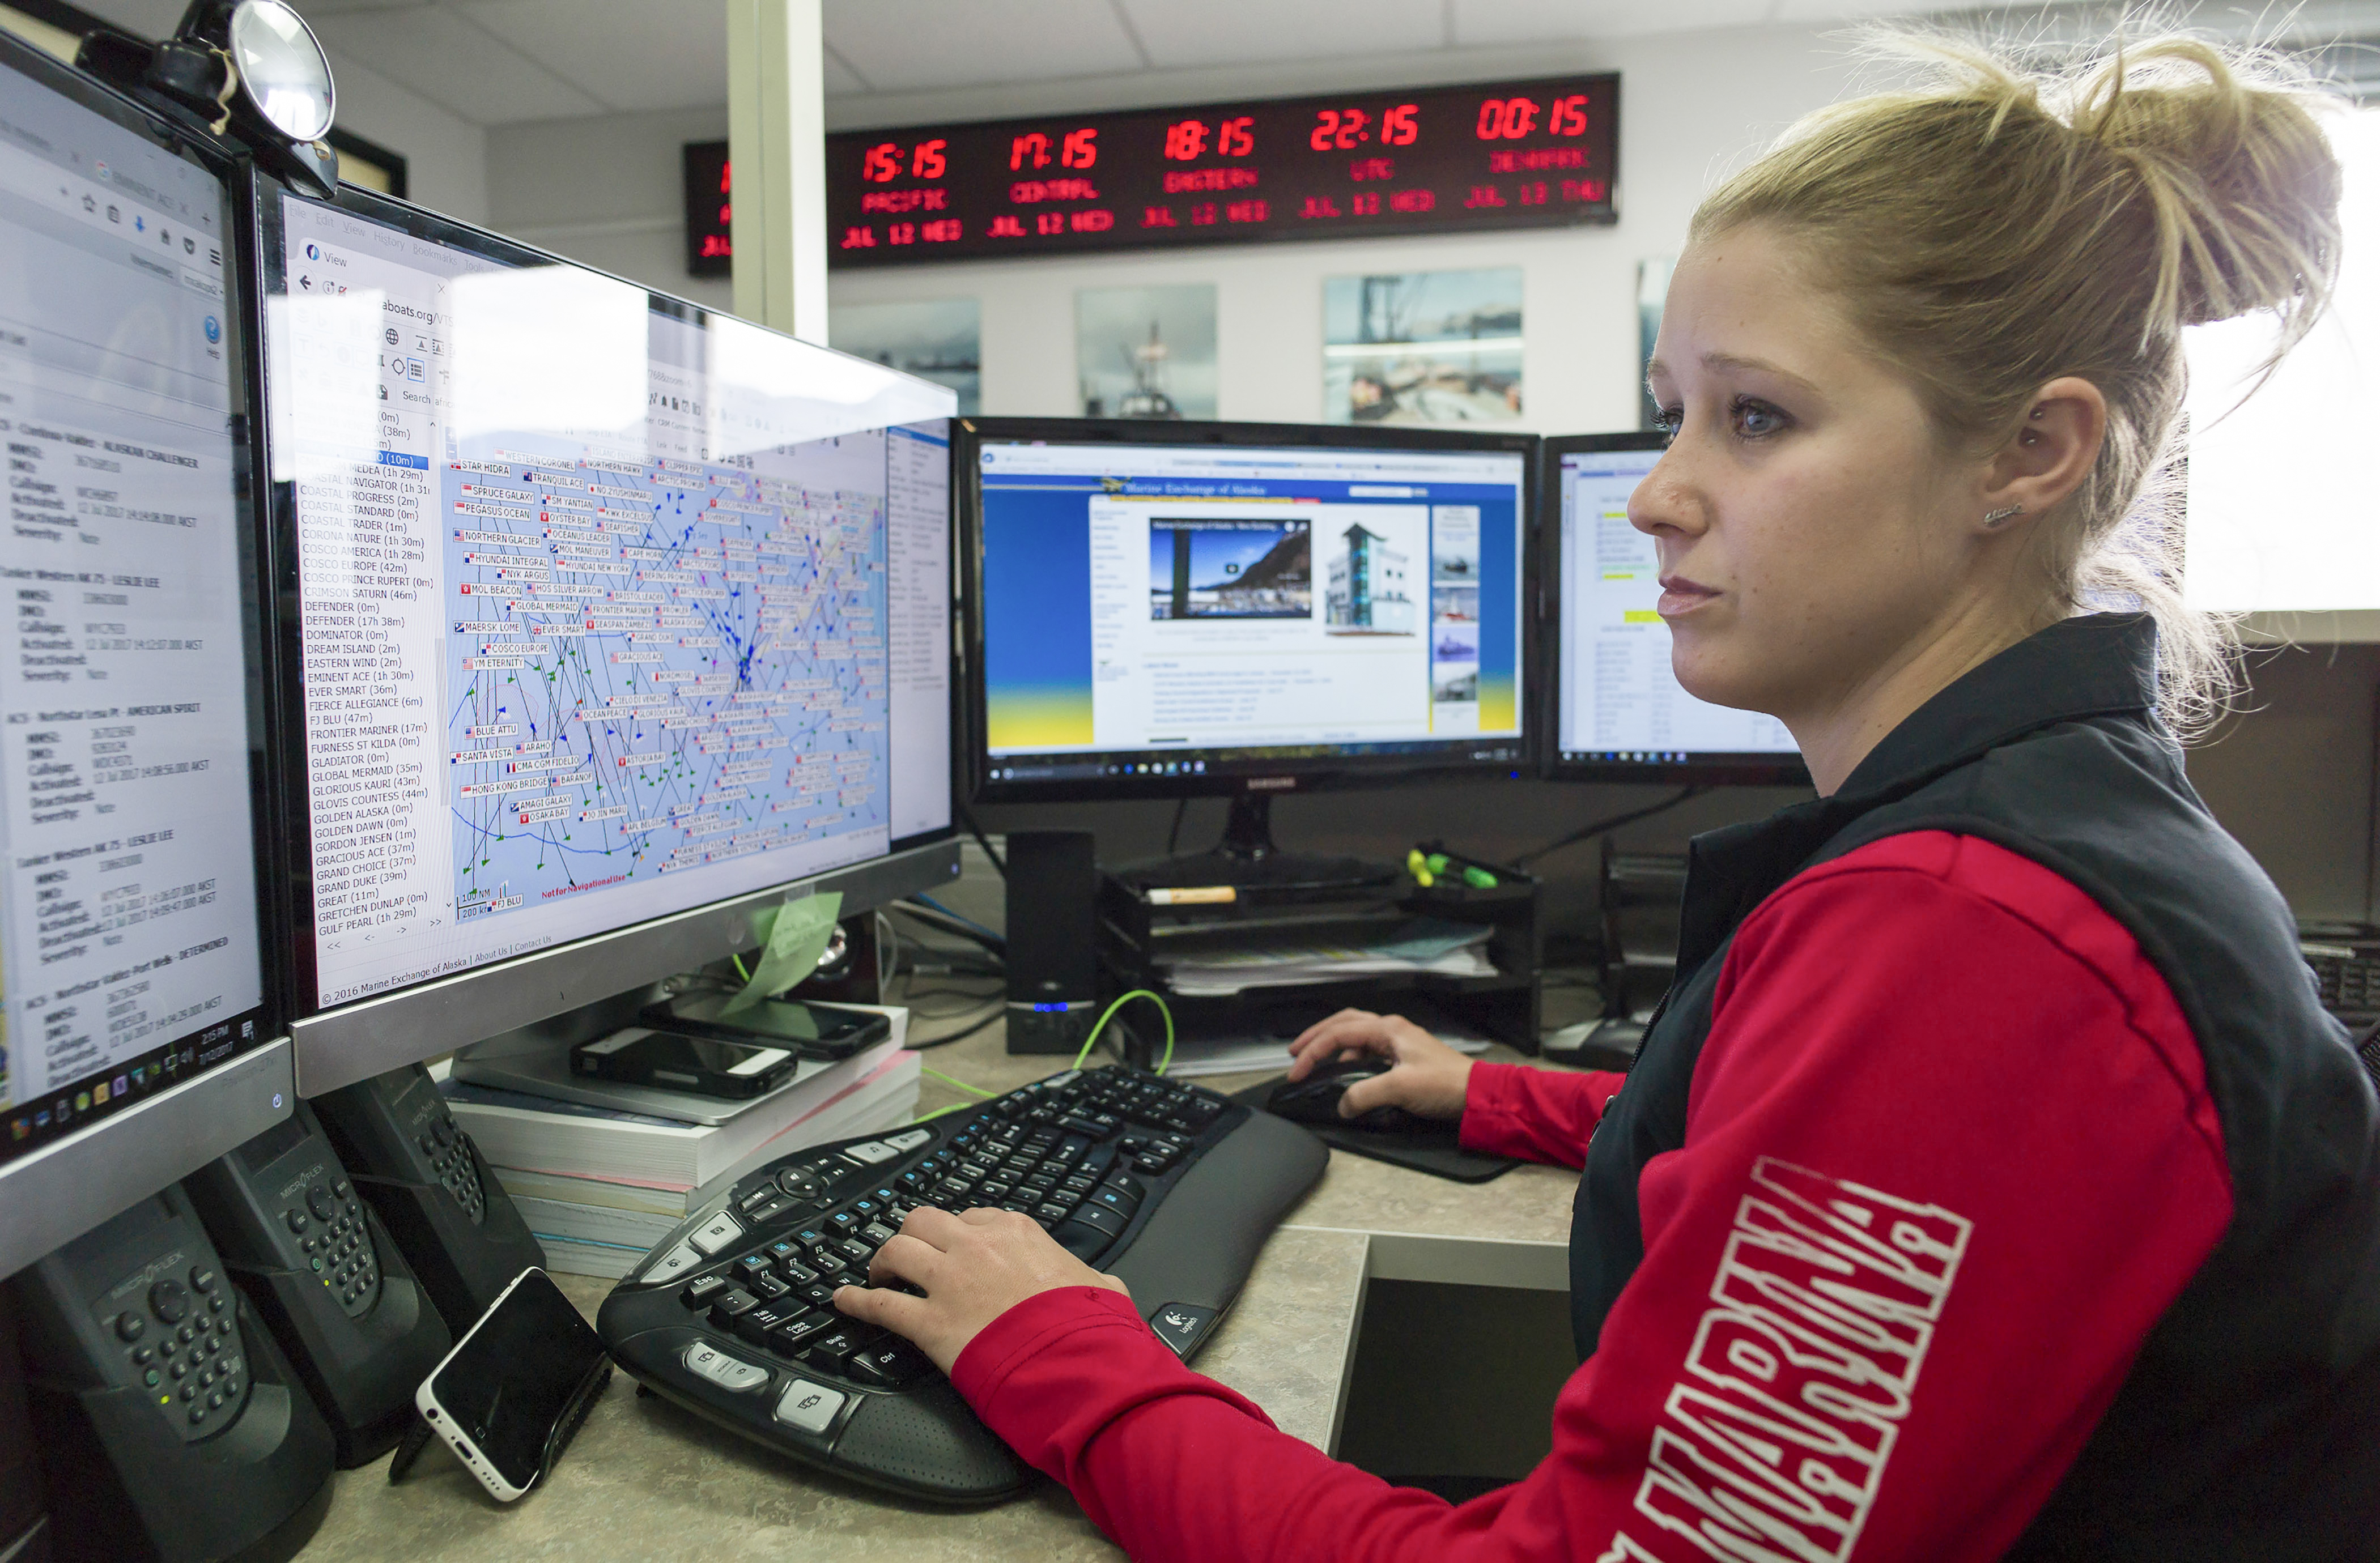 Shelby Martin, a maritime information specialist for the Marine Exchange of Alaska, monitors ship traffic through the state's waters, in Juneau, Alaska, July 12, 2017. As global warming reduces the extent of sea ice in the Arctic, more ships will be plying waters farther north, which raises concerns about ship safety. (Michael Penn / The New York Times)